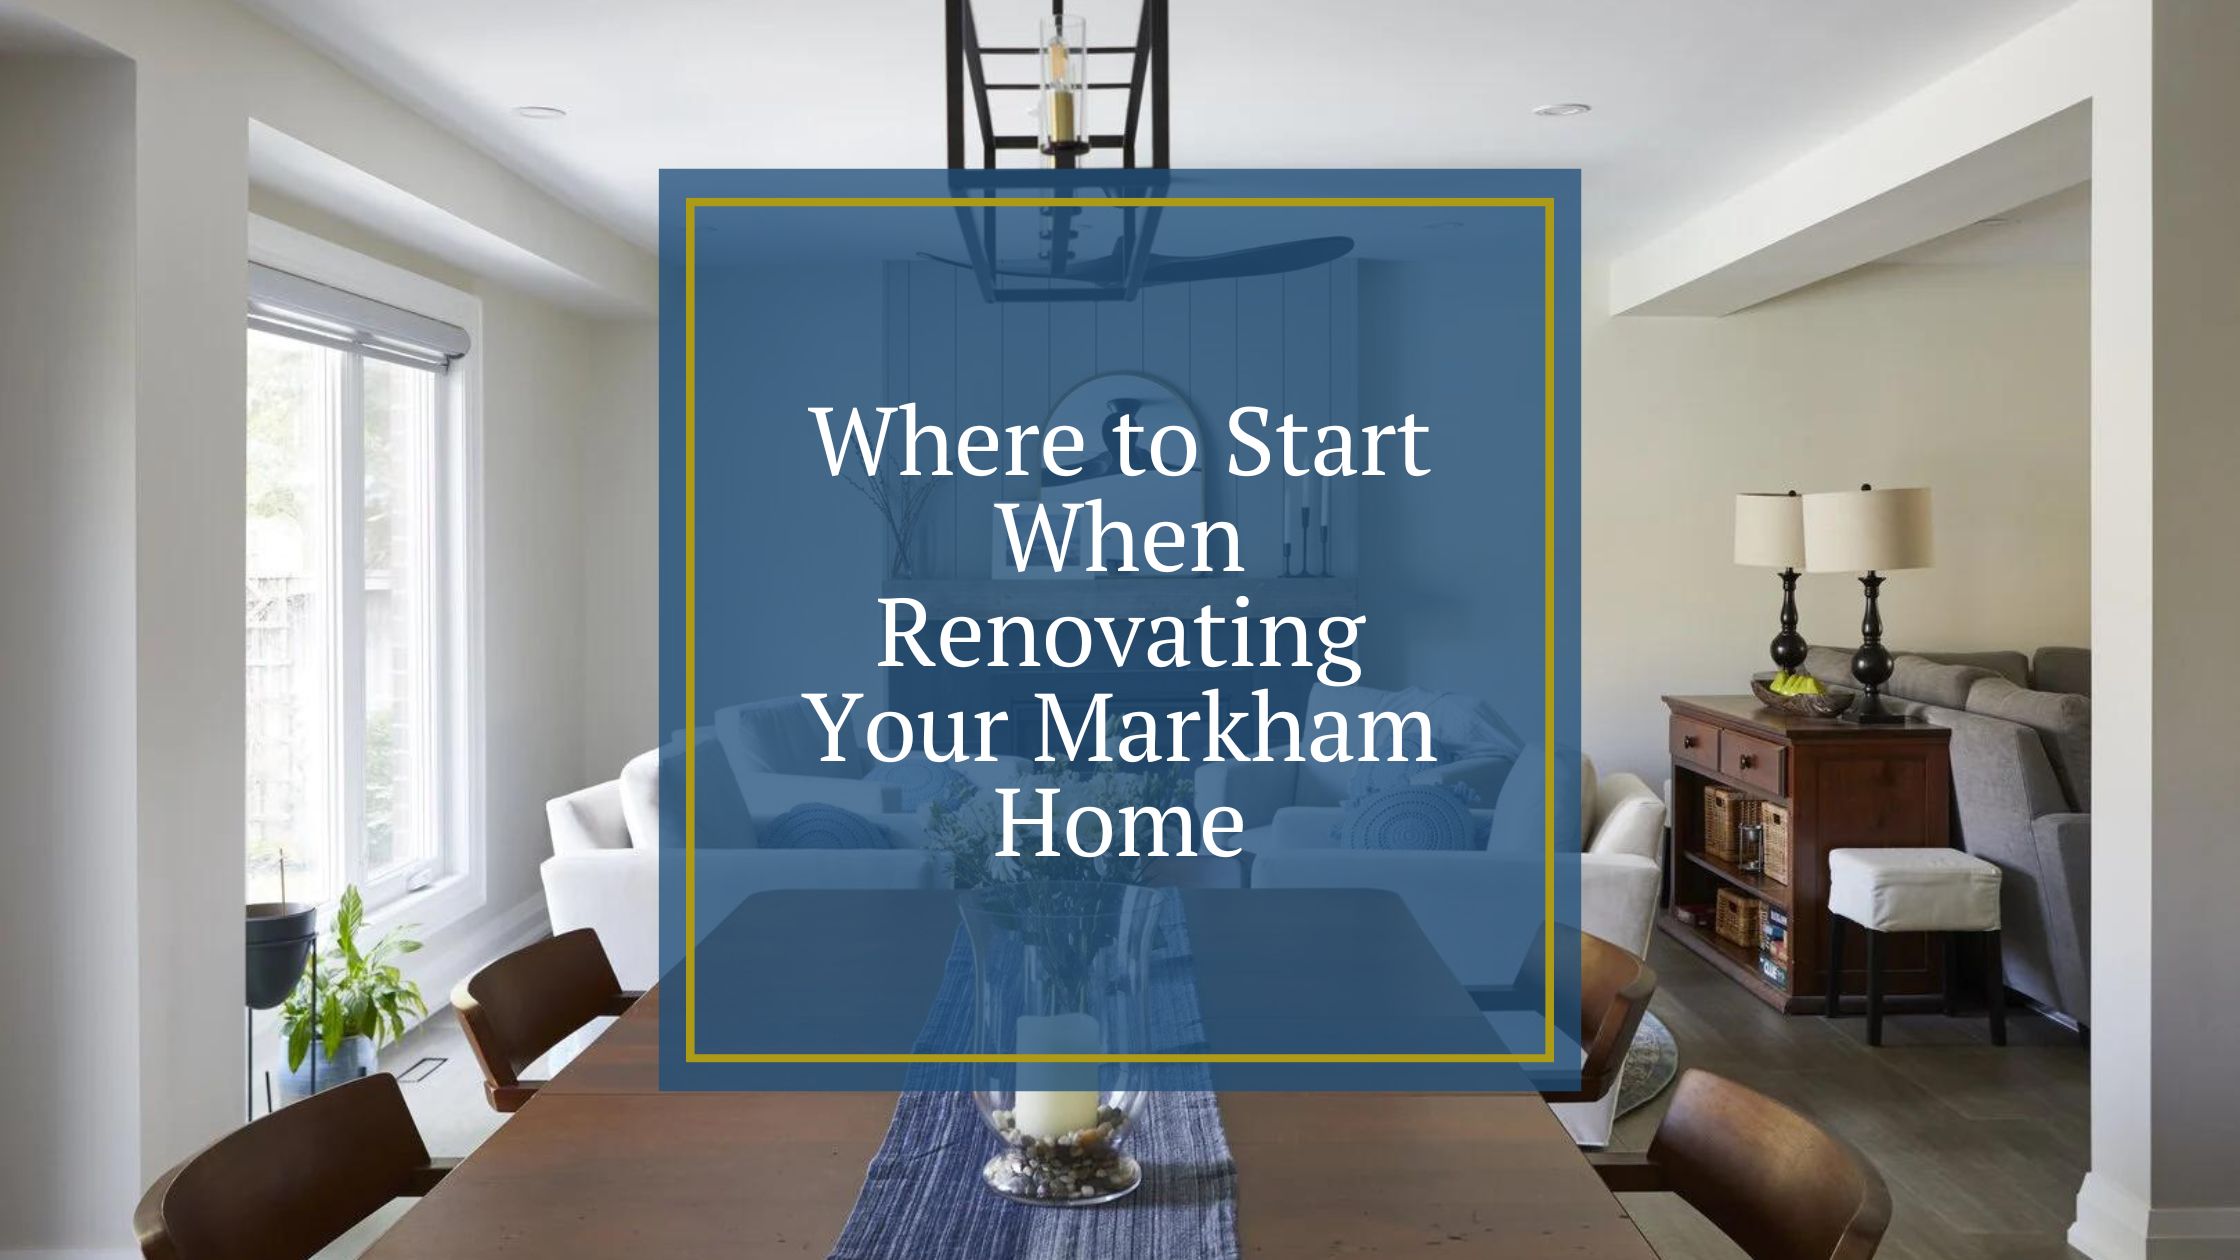 Where to Start When Renovating Your Markham Home